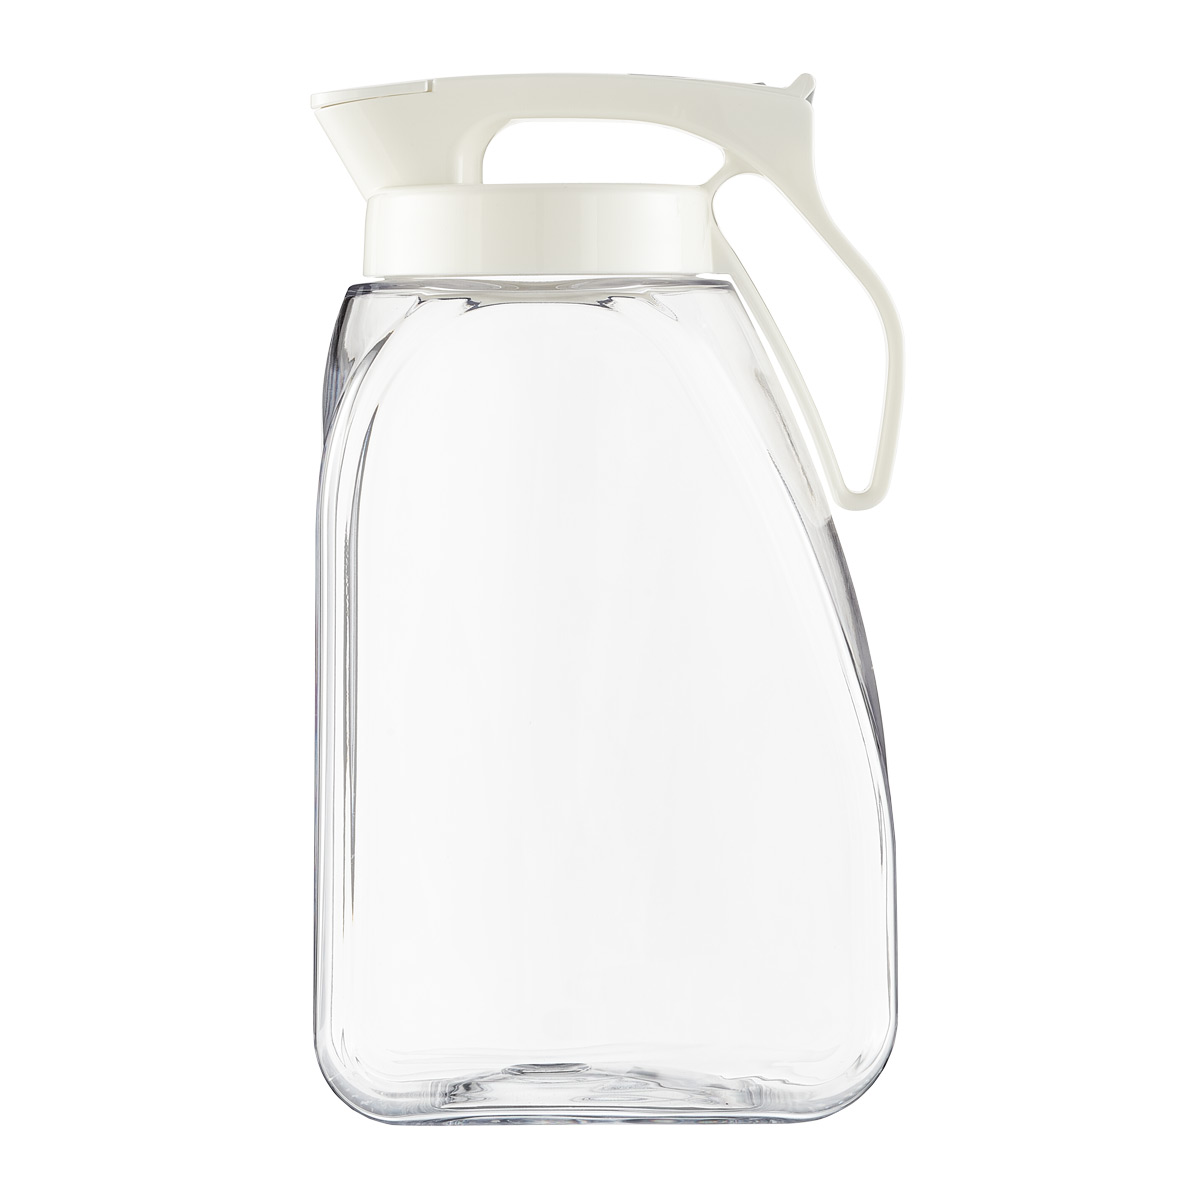 https://www.containerstore.com/catalogimages/424590/10084640_3.2_qt_One_Push_Water_Pitch.jpg